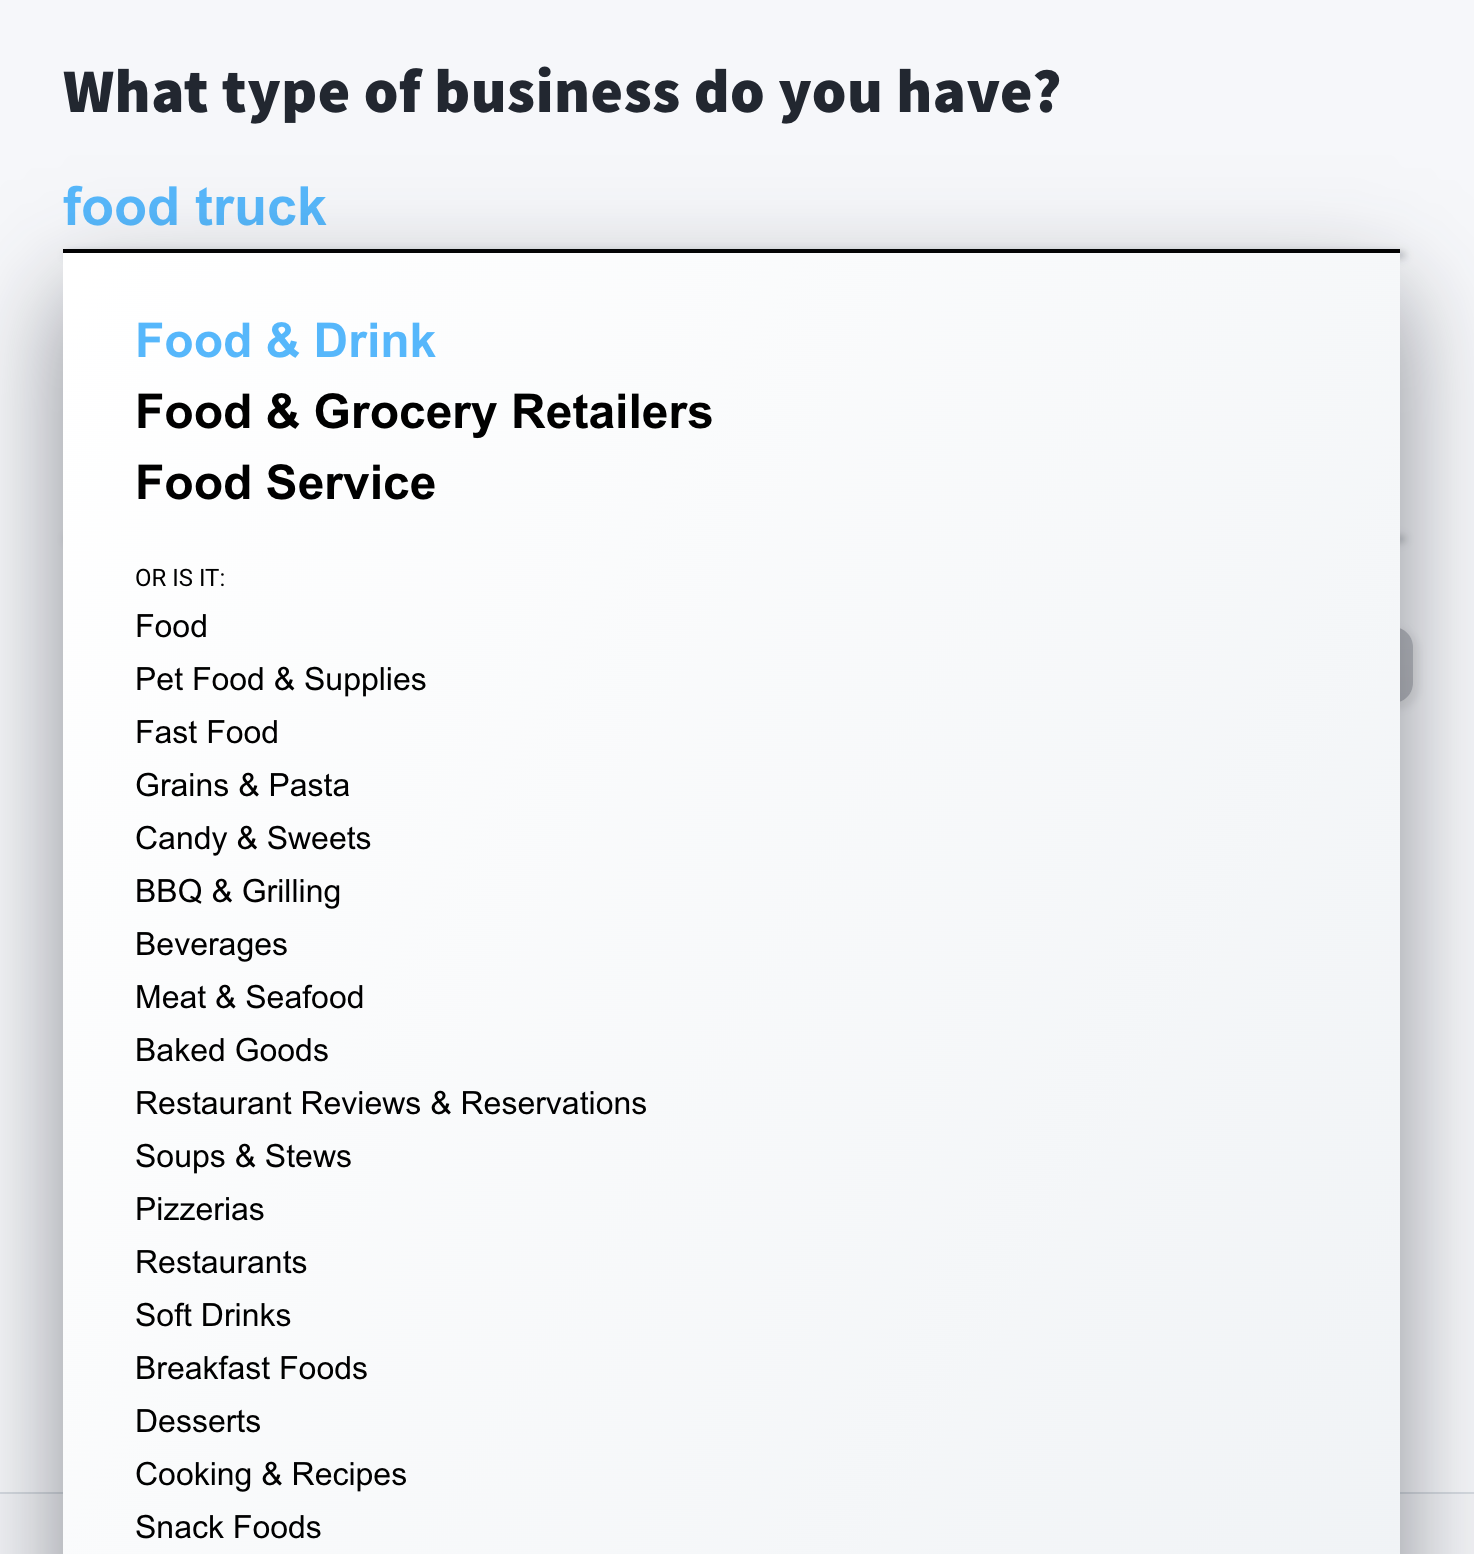 A screenshot from GetResponse showing the options available when searching the term "food truck."